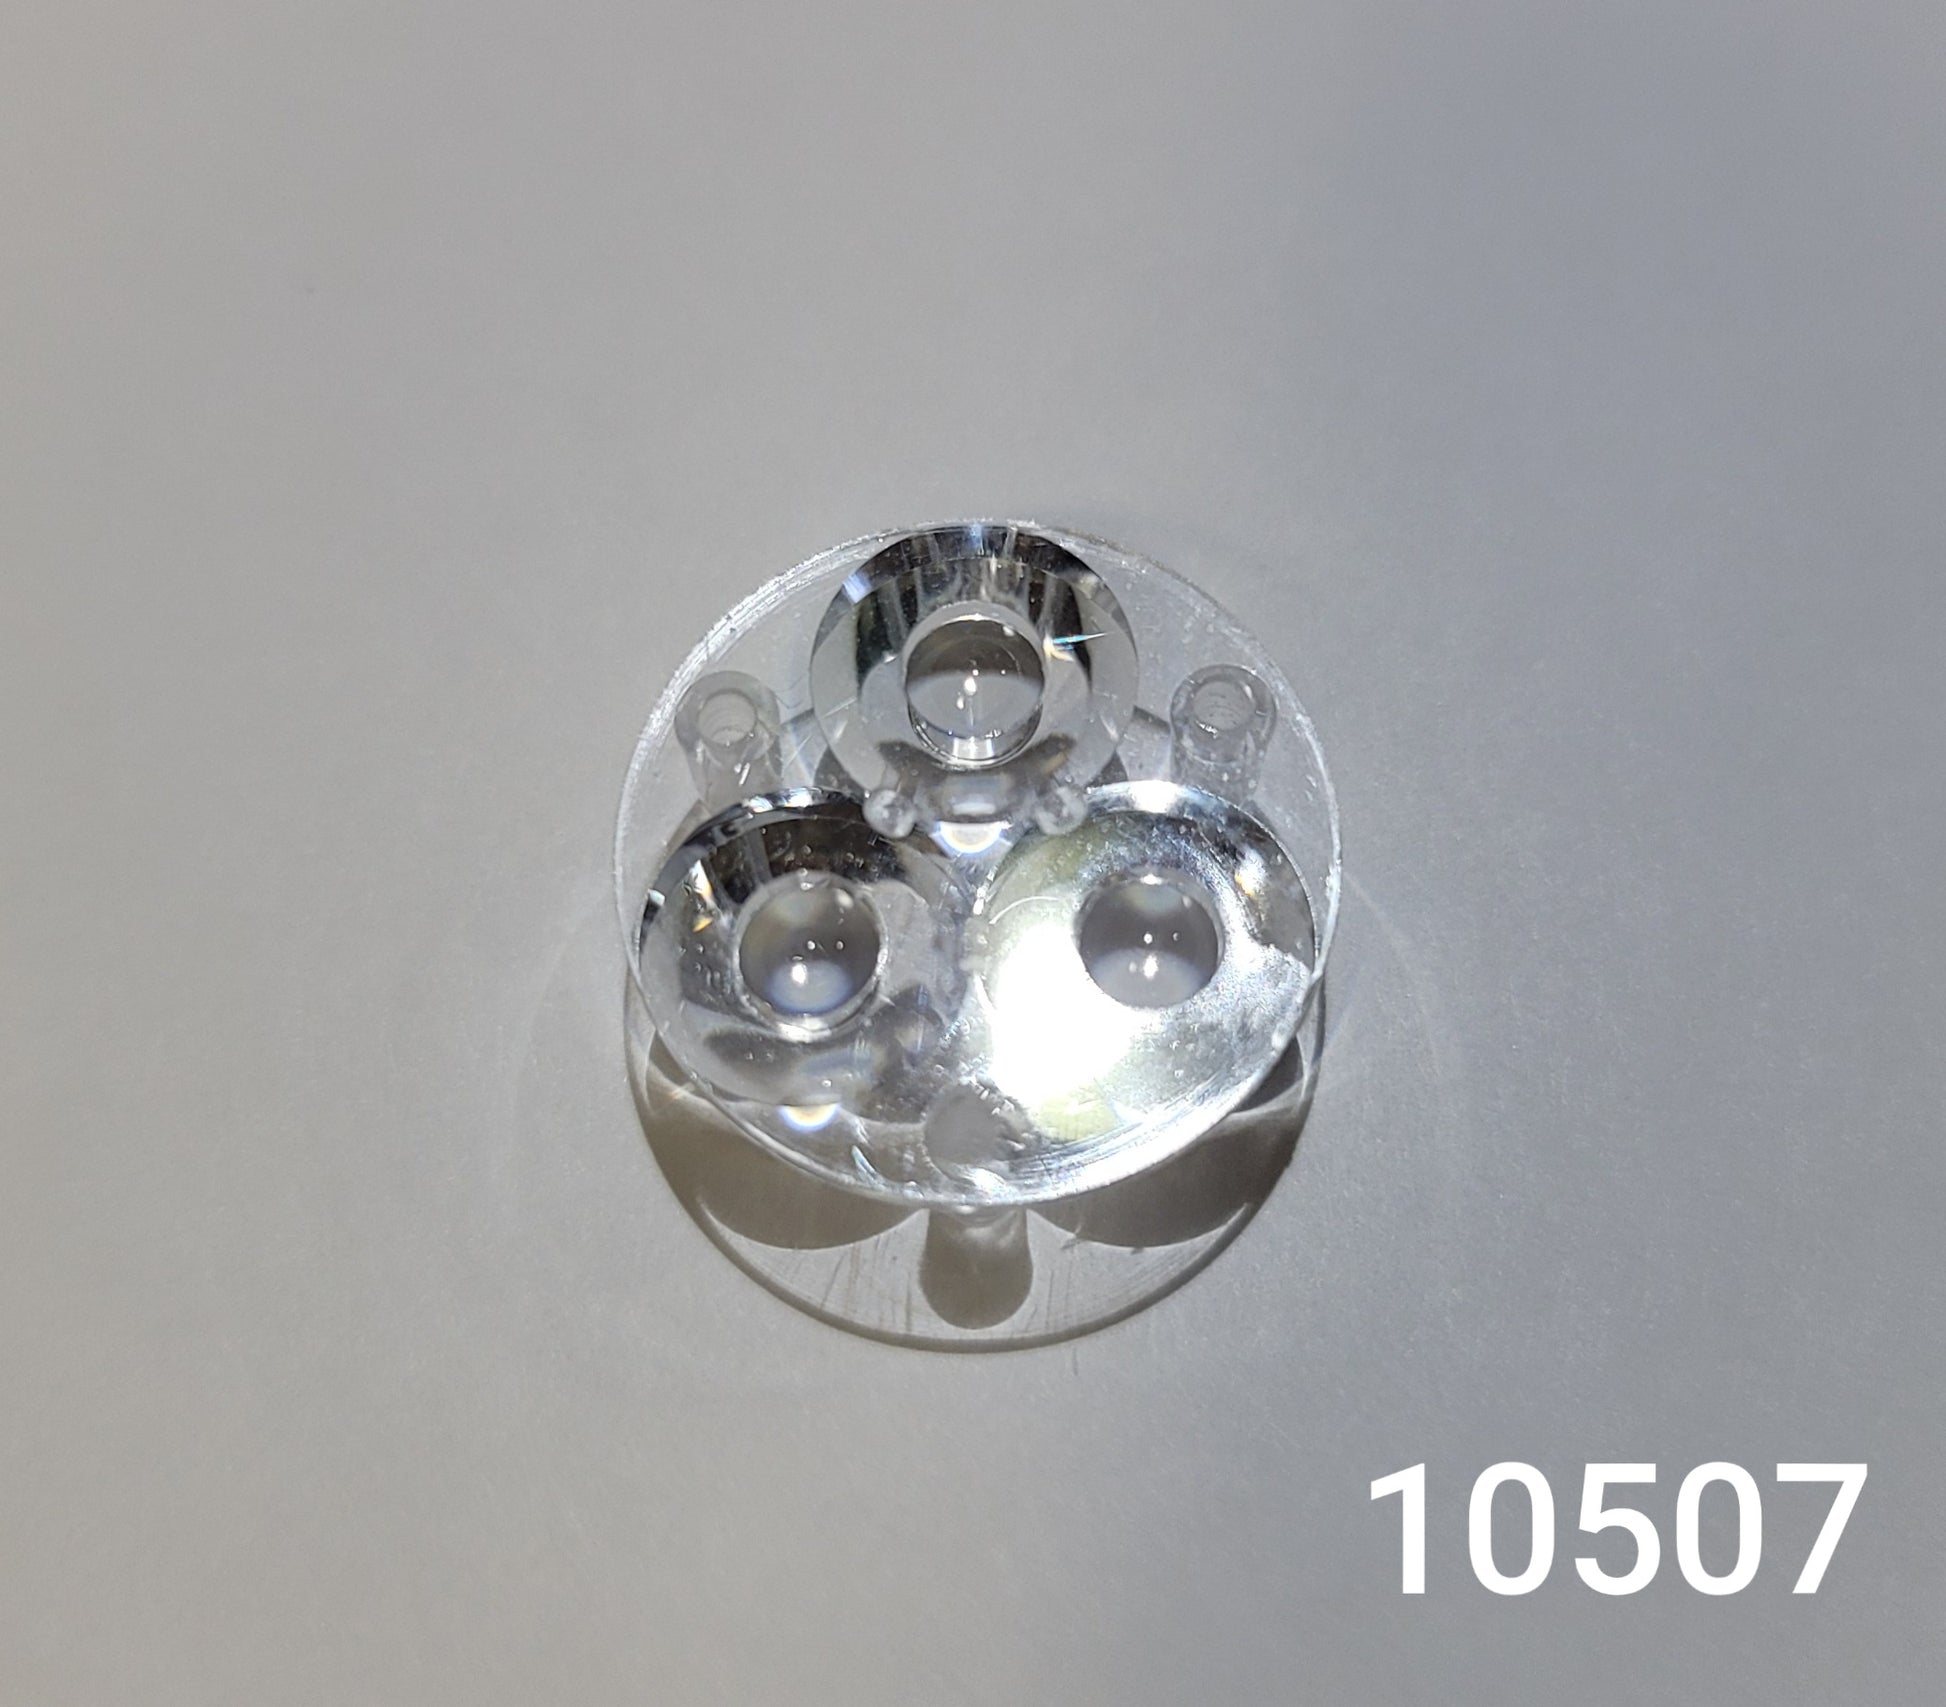 Carclo 10511 10507 Drilled Optics 20mm 1.5x6mm For Tritium or Glow Tubes 10507 (CLEAR NARROW SPOT)